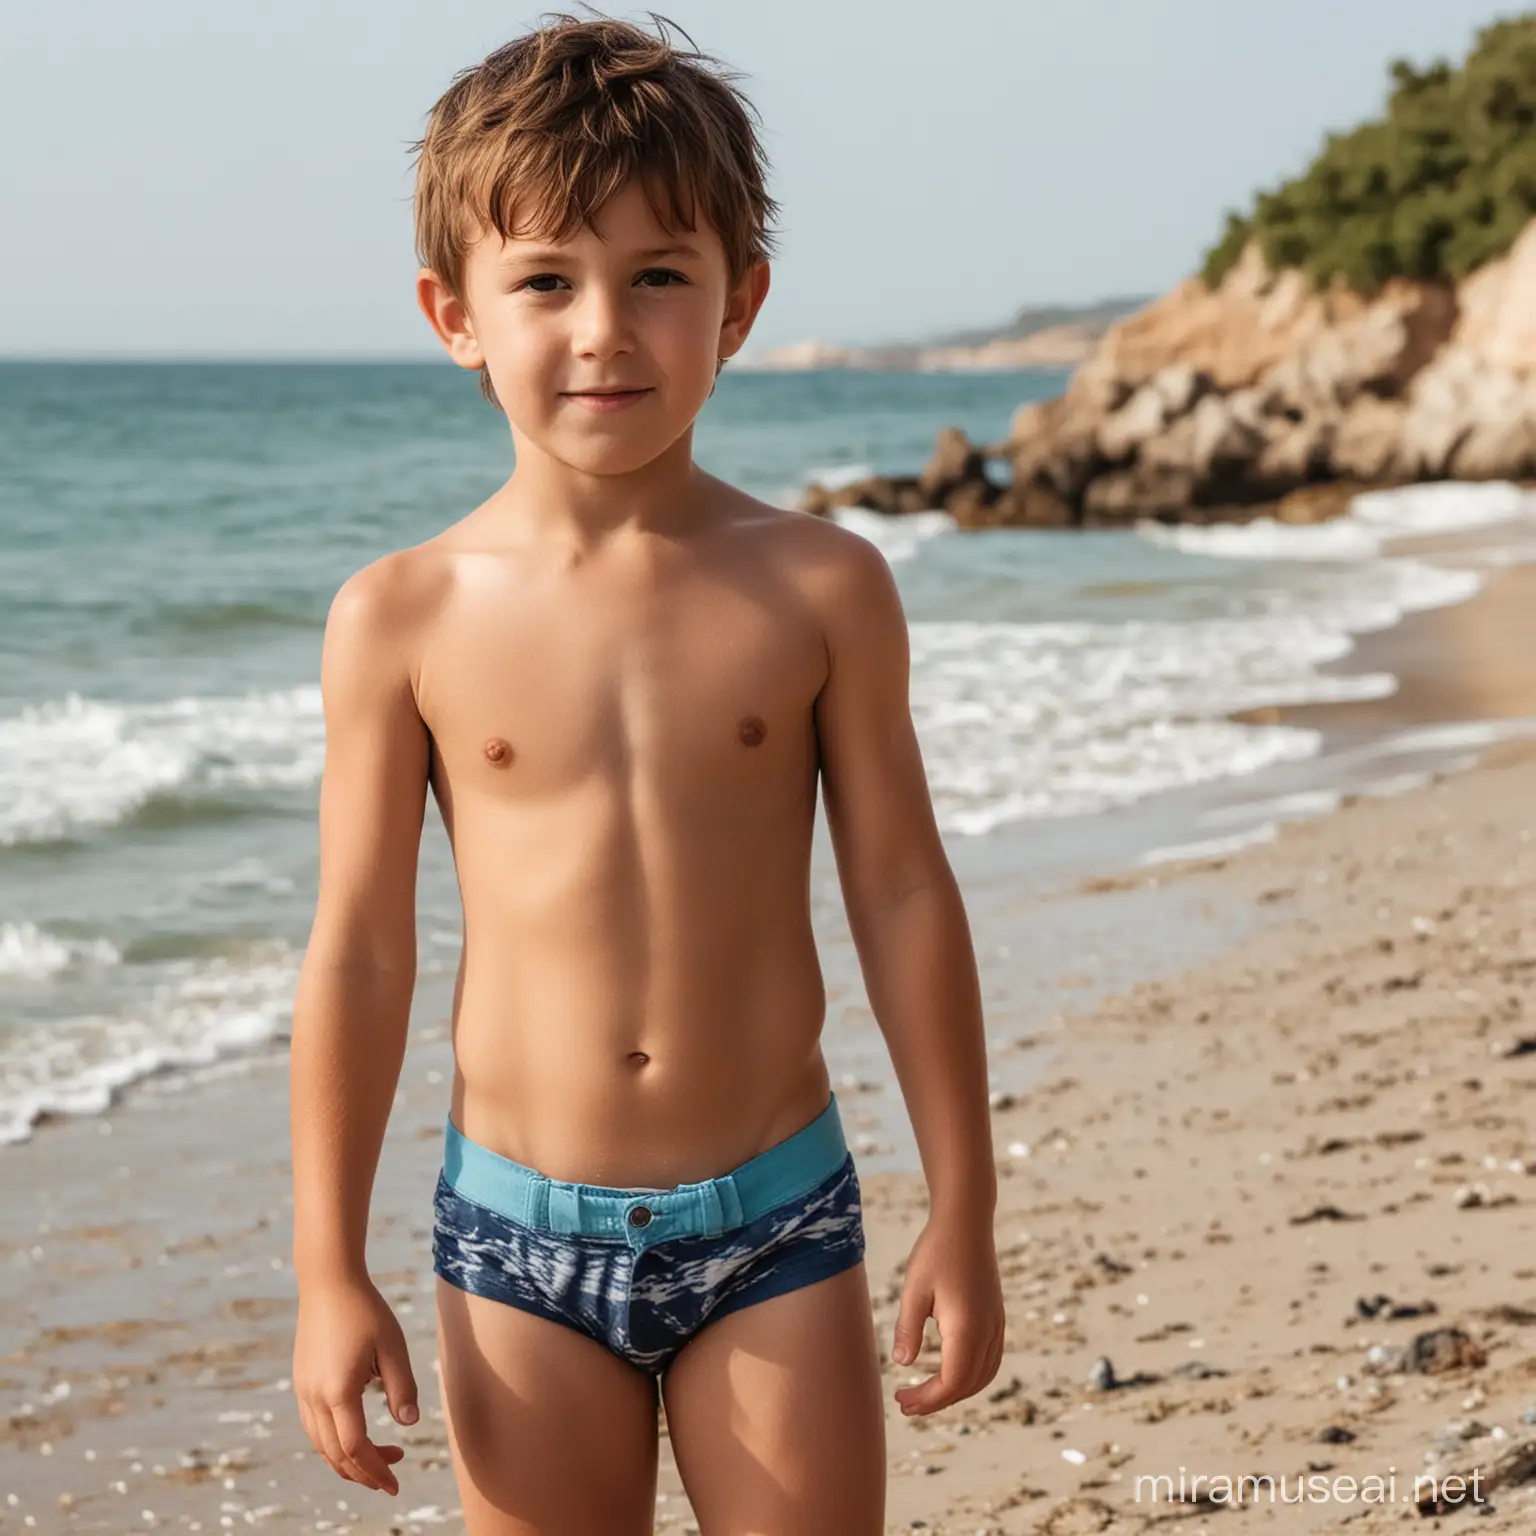 shirtless child by the beach